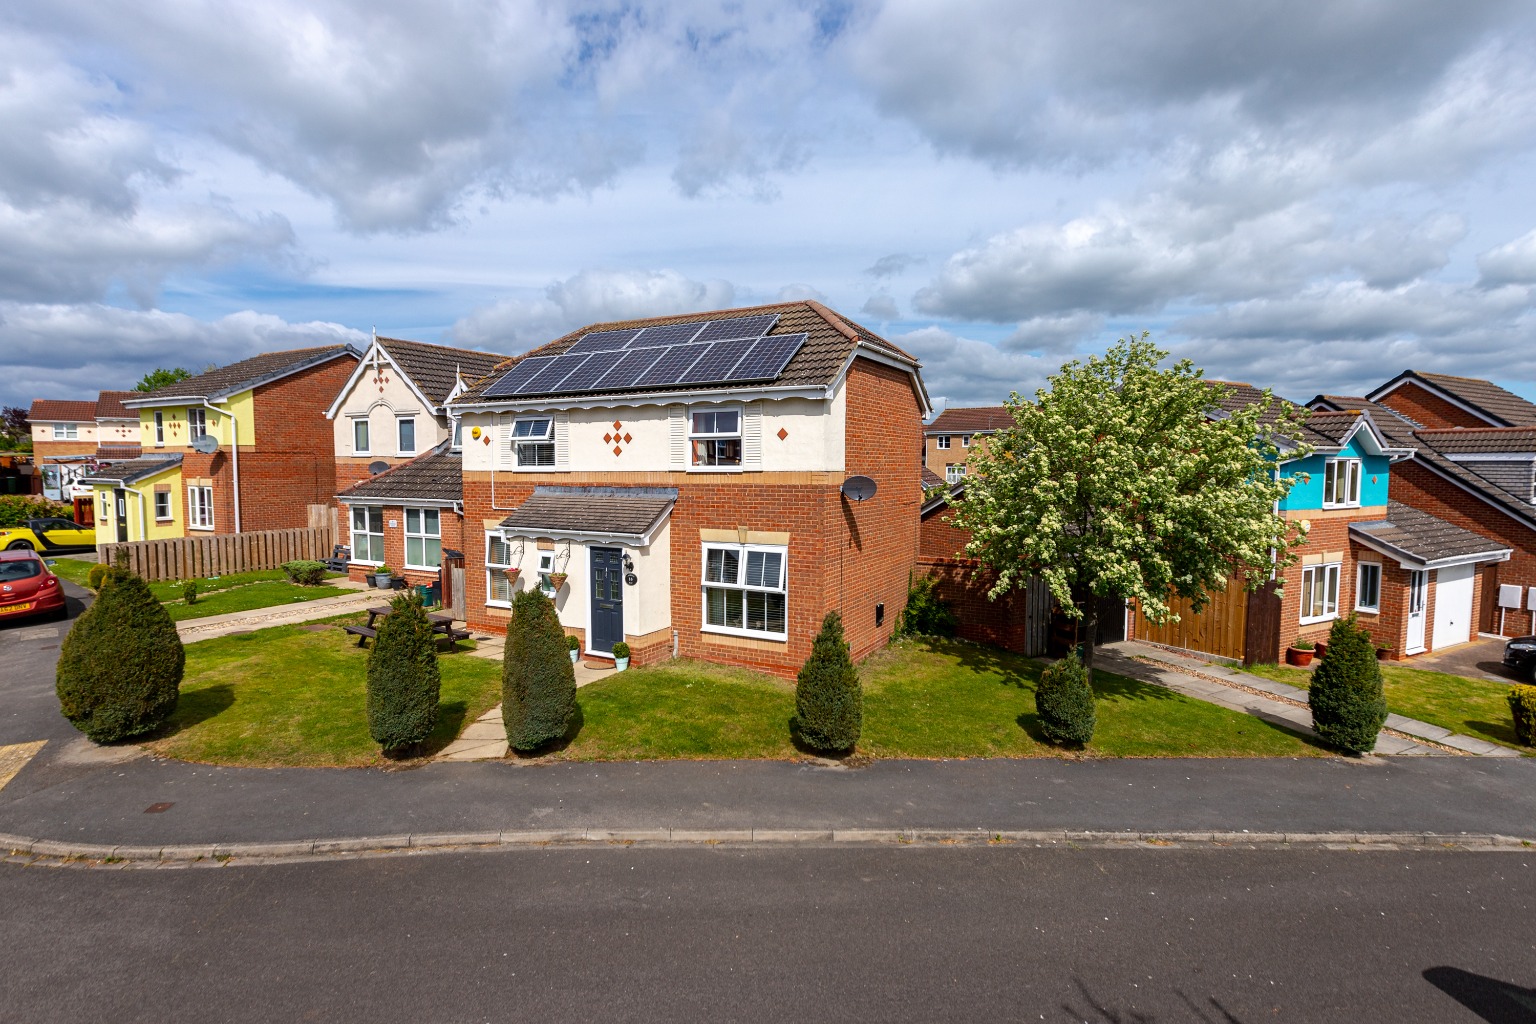 3 bed detached house for sale in Cookson Way, Catterick Garrison - Property Image 1